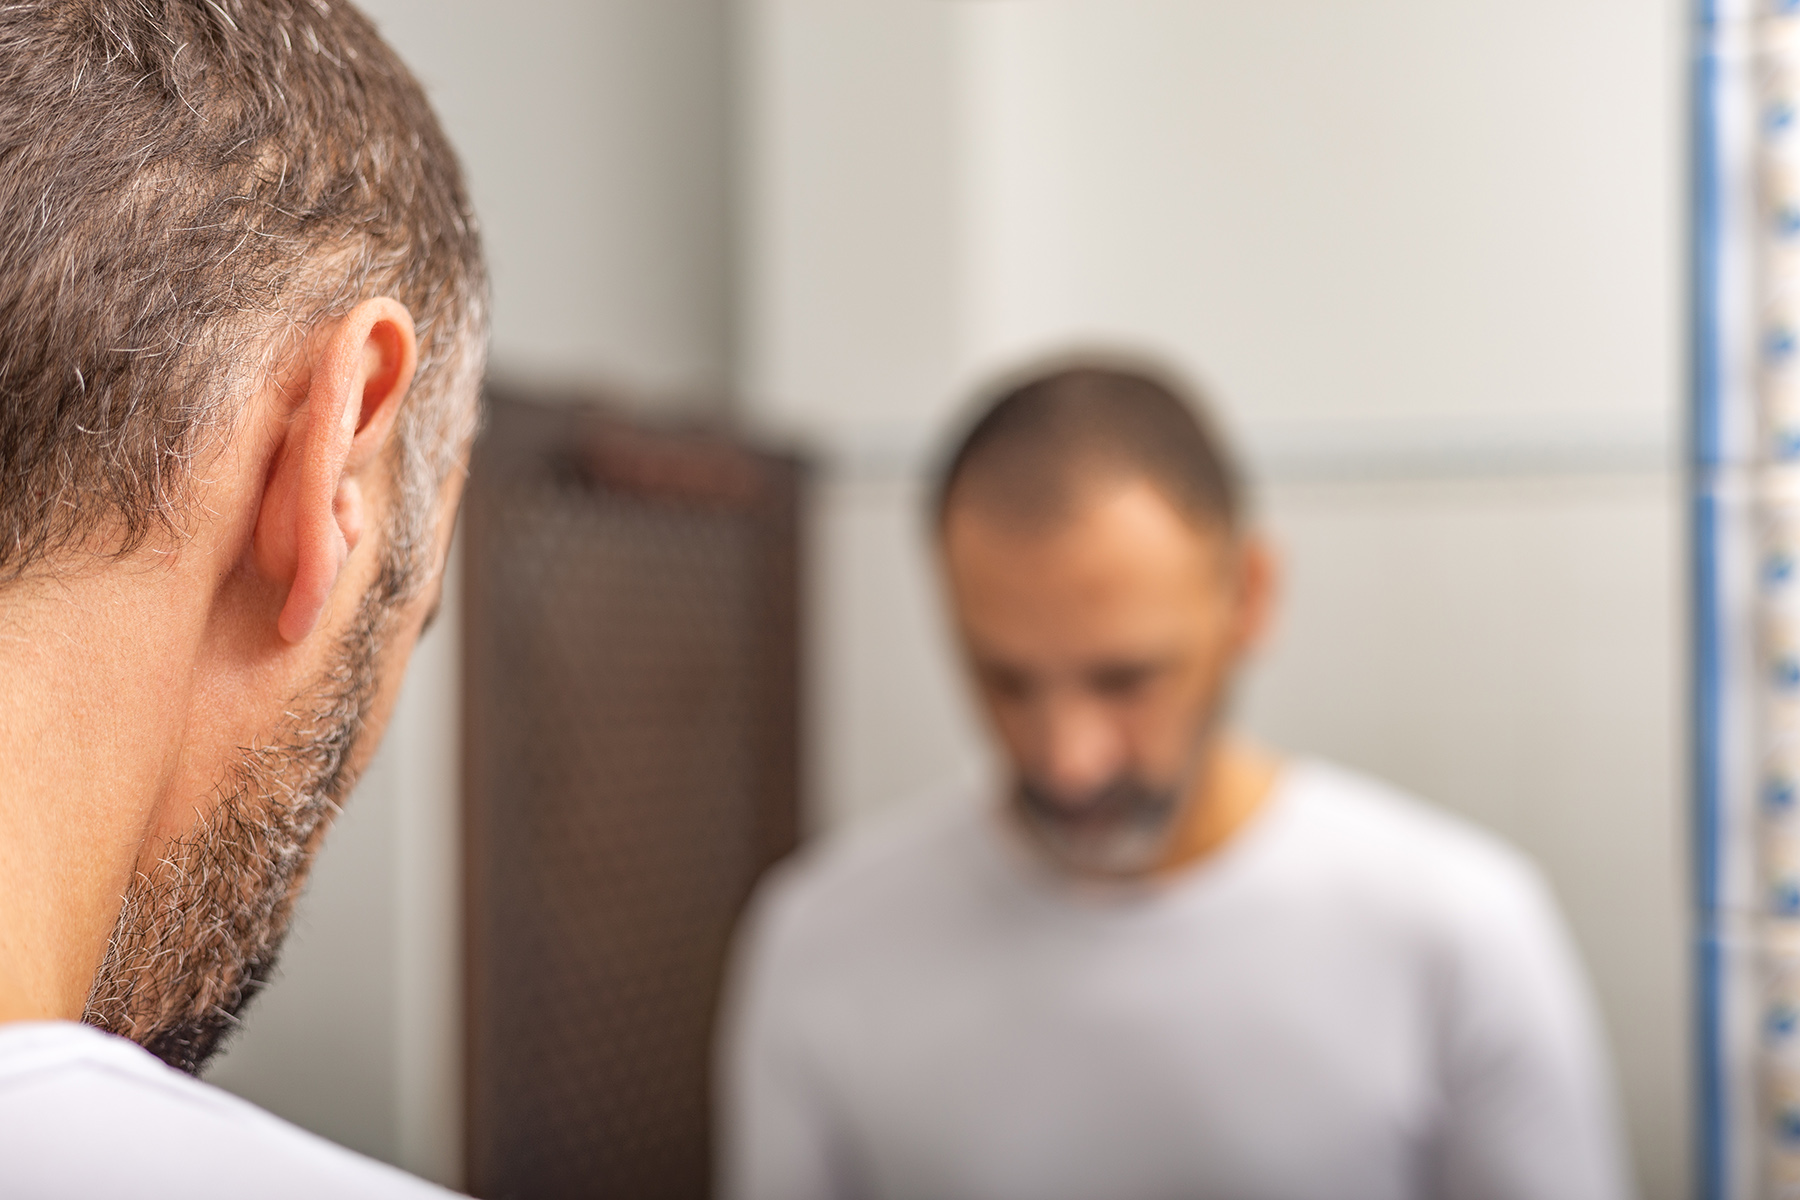 Blurry reflection in bathroom mirror of a man with a short hair and a stubble beard in whirt shirt looking down, looking worried